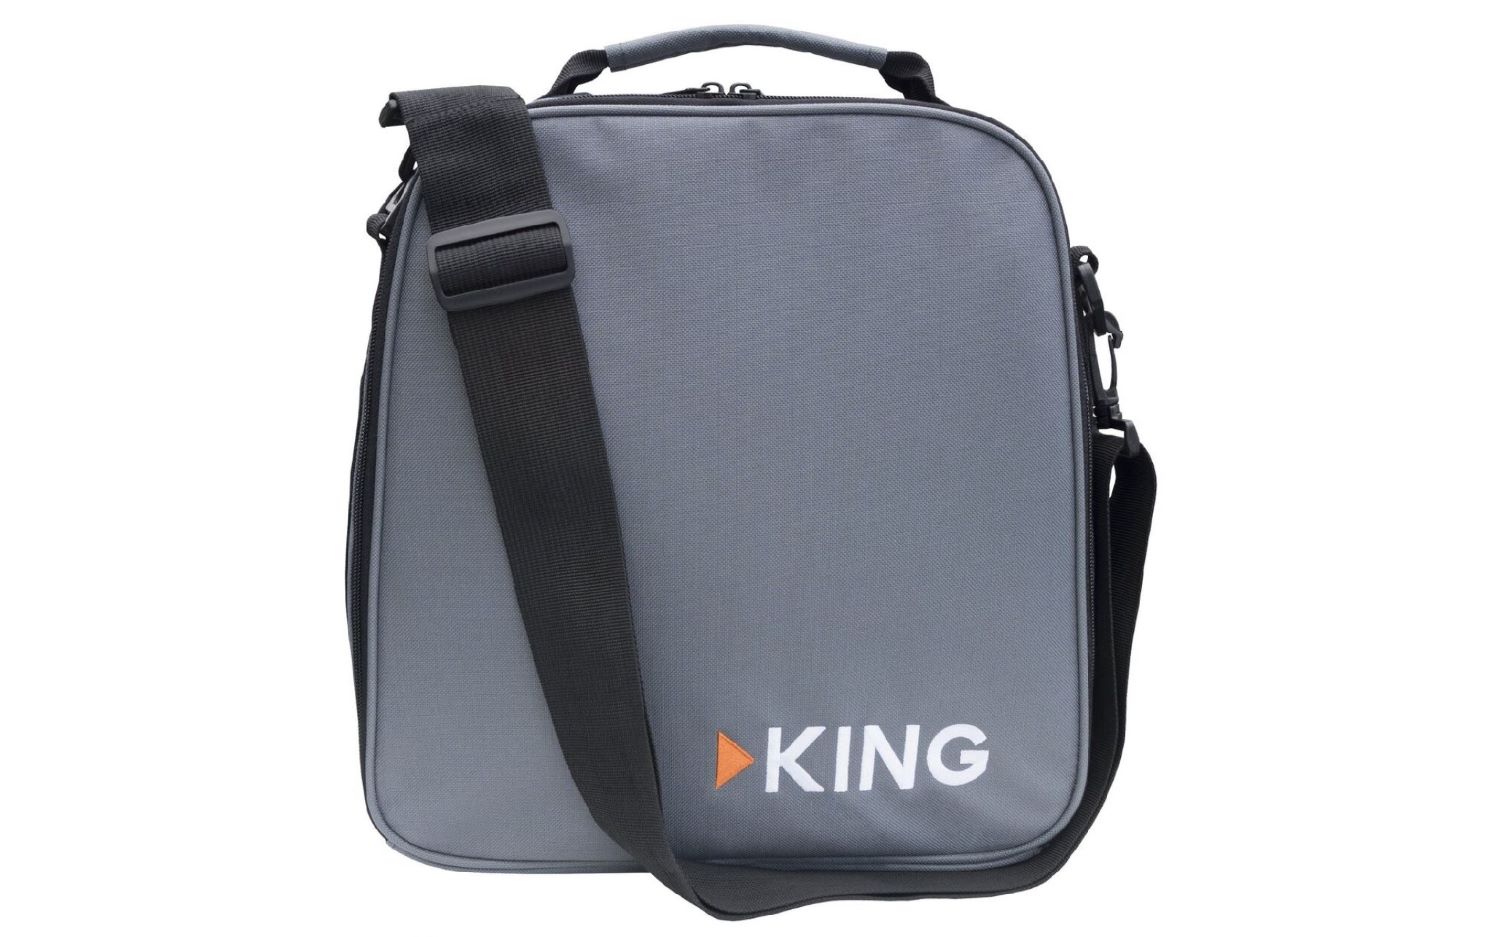 What Size Is The King OmniGo Portable Omnidirectional Over-The-Air Antenna Storage Bag